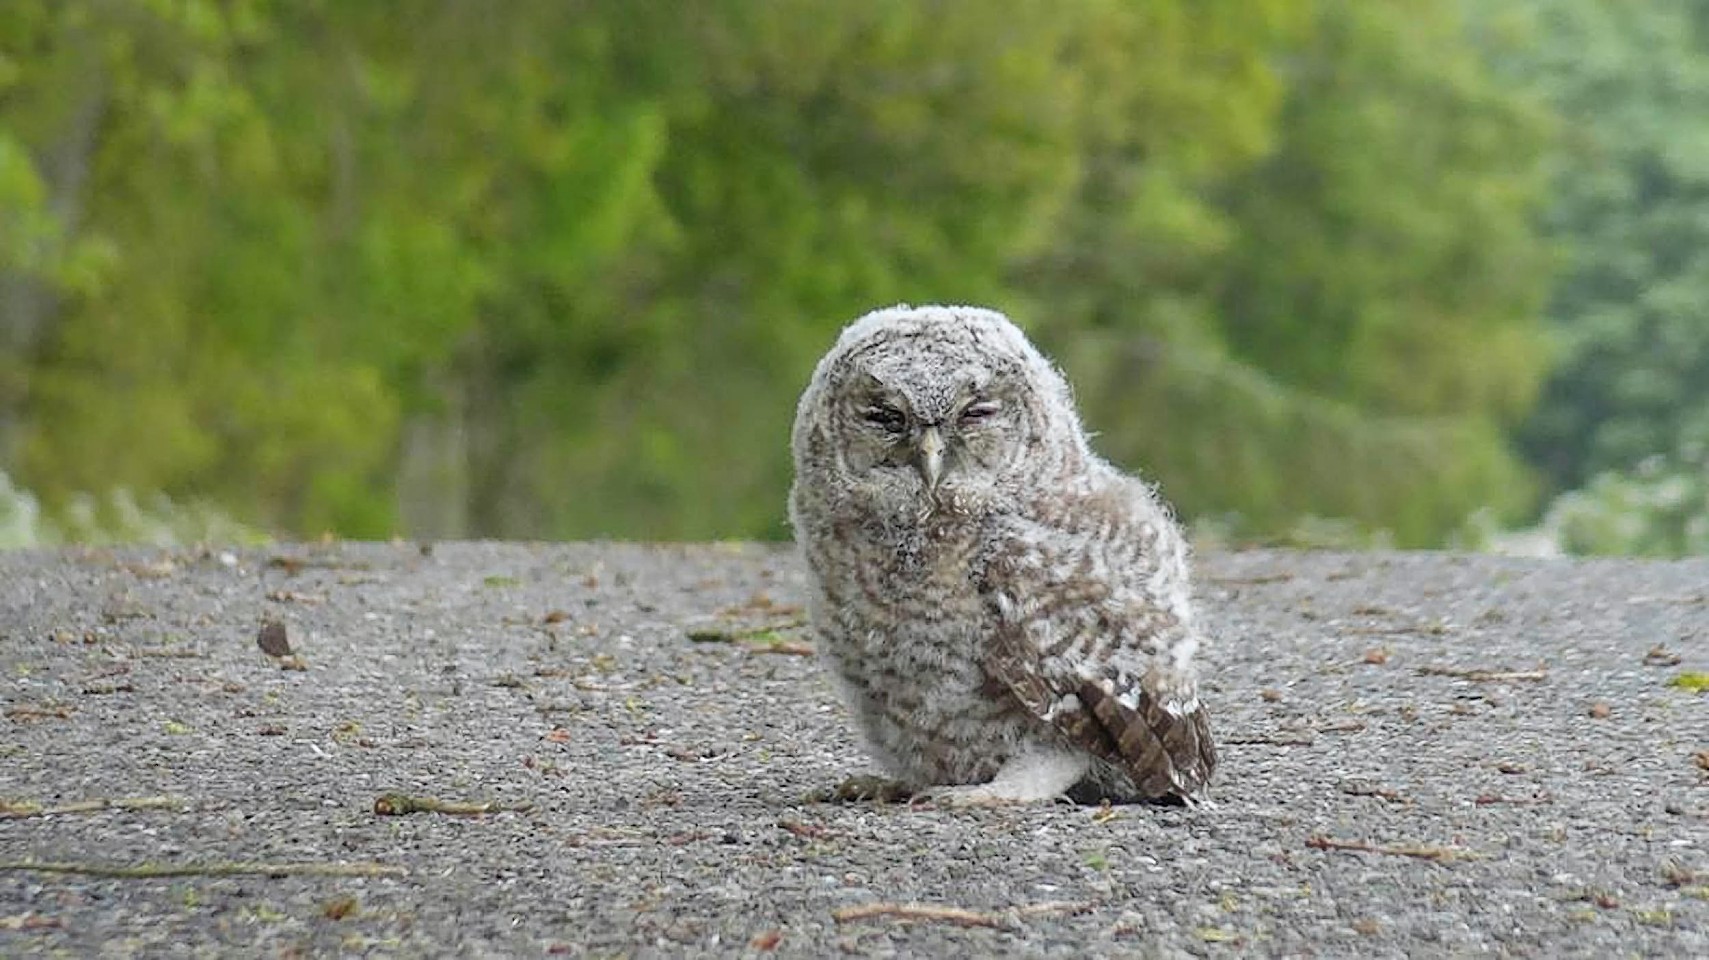 THIS is the moment a 20-ton tractor was stopped in its tracks by a 1lb baby owl. The stubborn tawny owlet decided to sit in the middle of a single-track road in the hamlet of Dalqueich